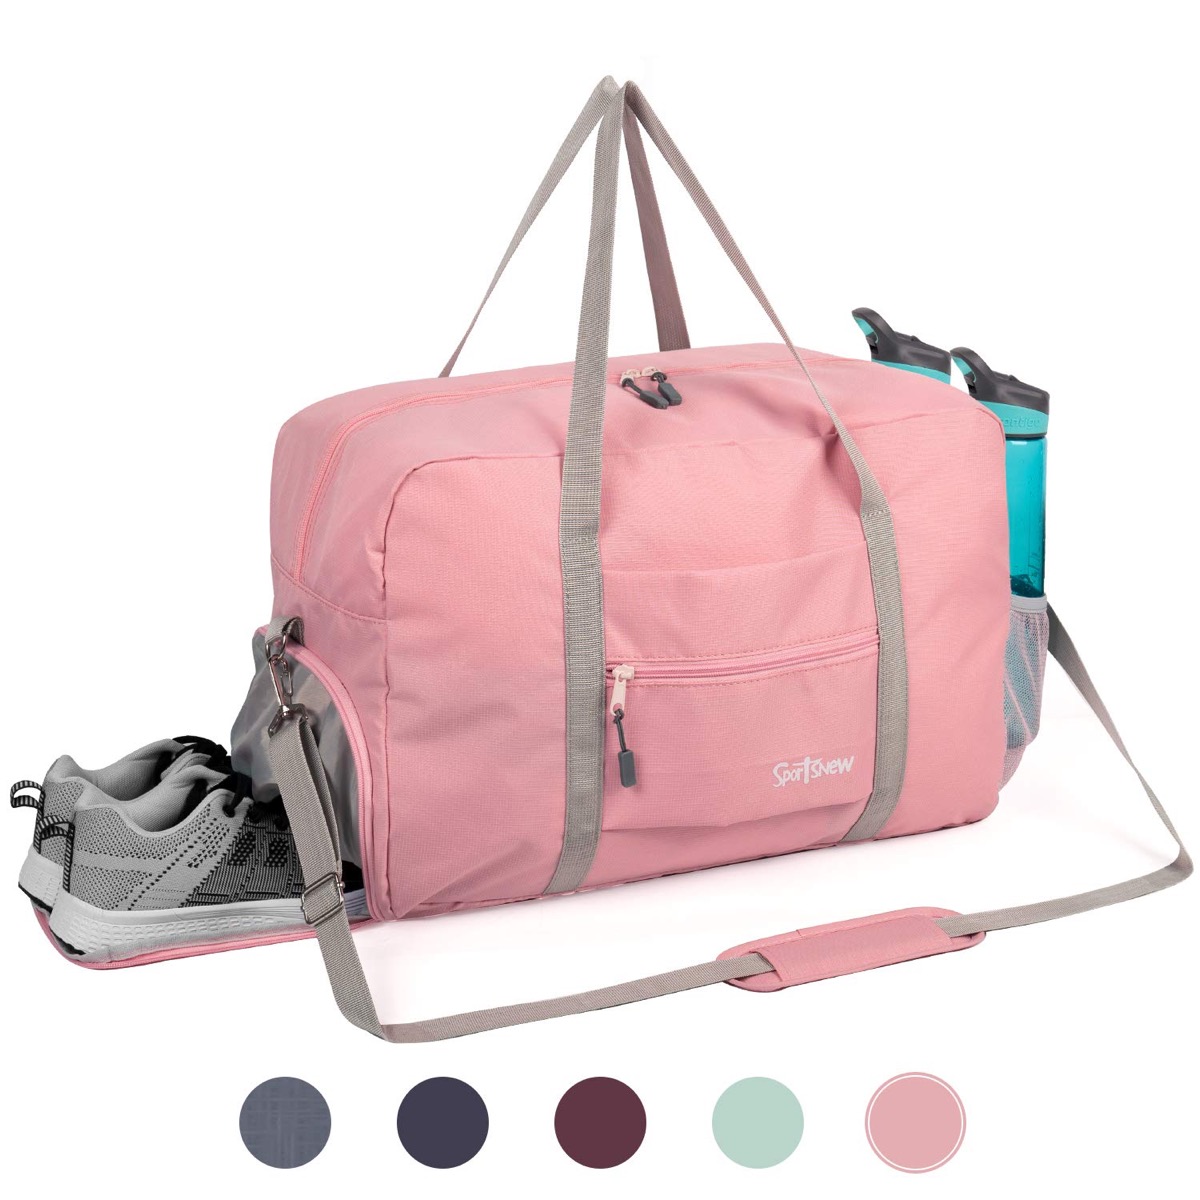 pink duffel-style gym back with gray straps